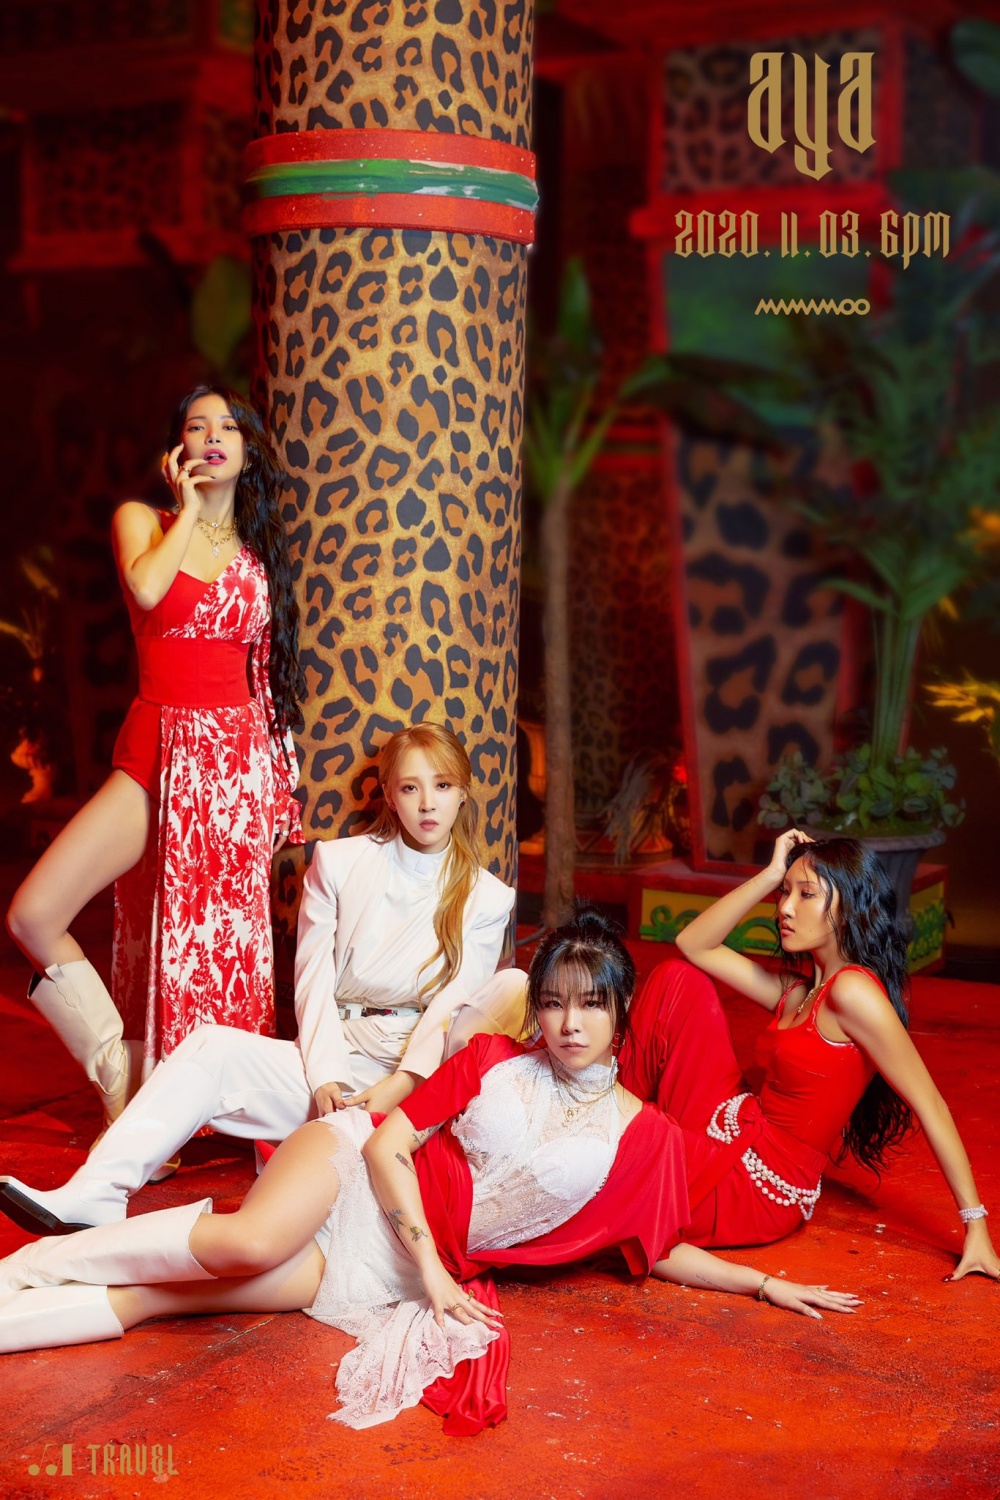 Mamamoo releases new album 'TRAVEL', First challenge to Arabic music